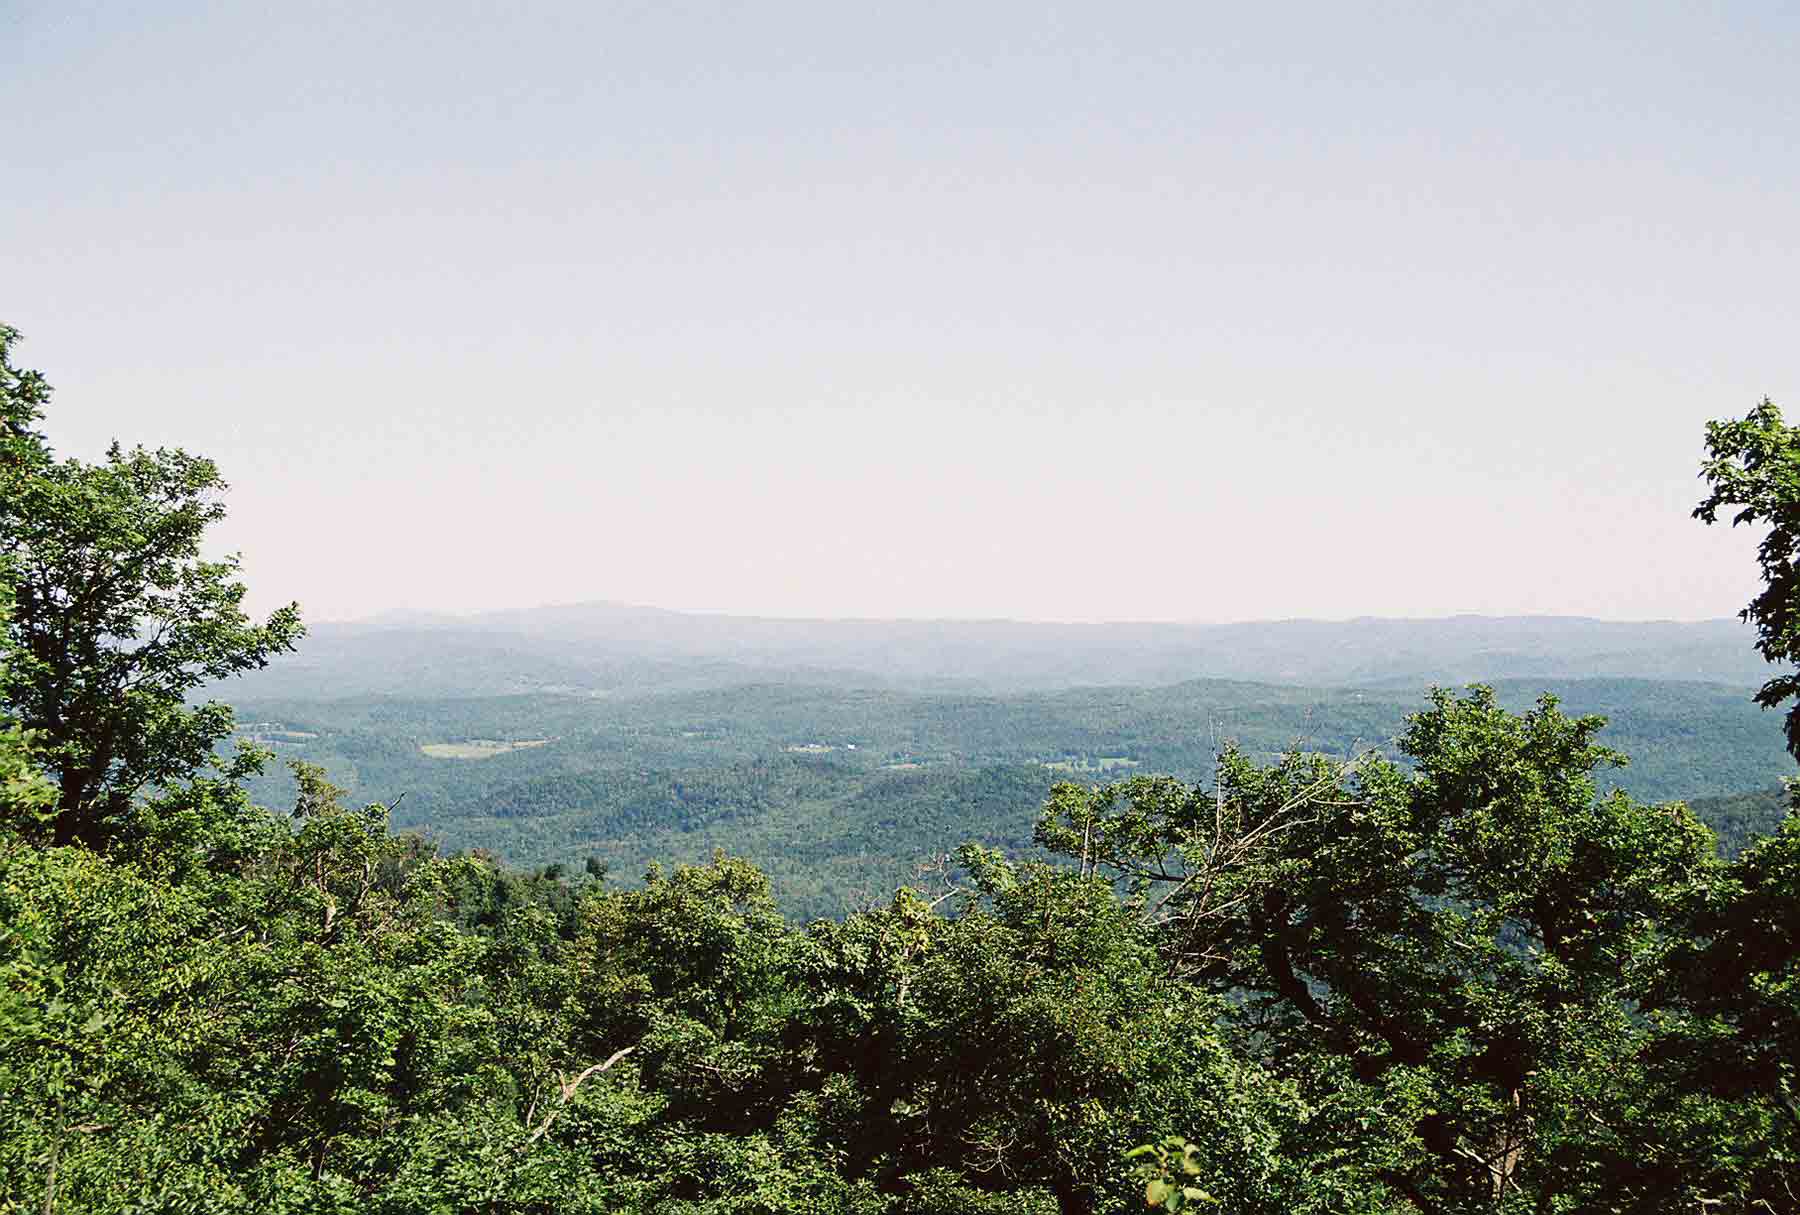 mm 7.8 - View NE from Lakota Lake Lookout. In the distance a range of mountains can be seen. The two peaks on the left are Mt. Cube and Smart's Mt in New Hampshire. The AT climbs both of these.  Courtesy dlcul@conncoll.edu